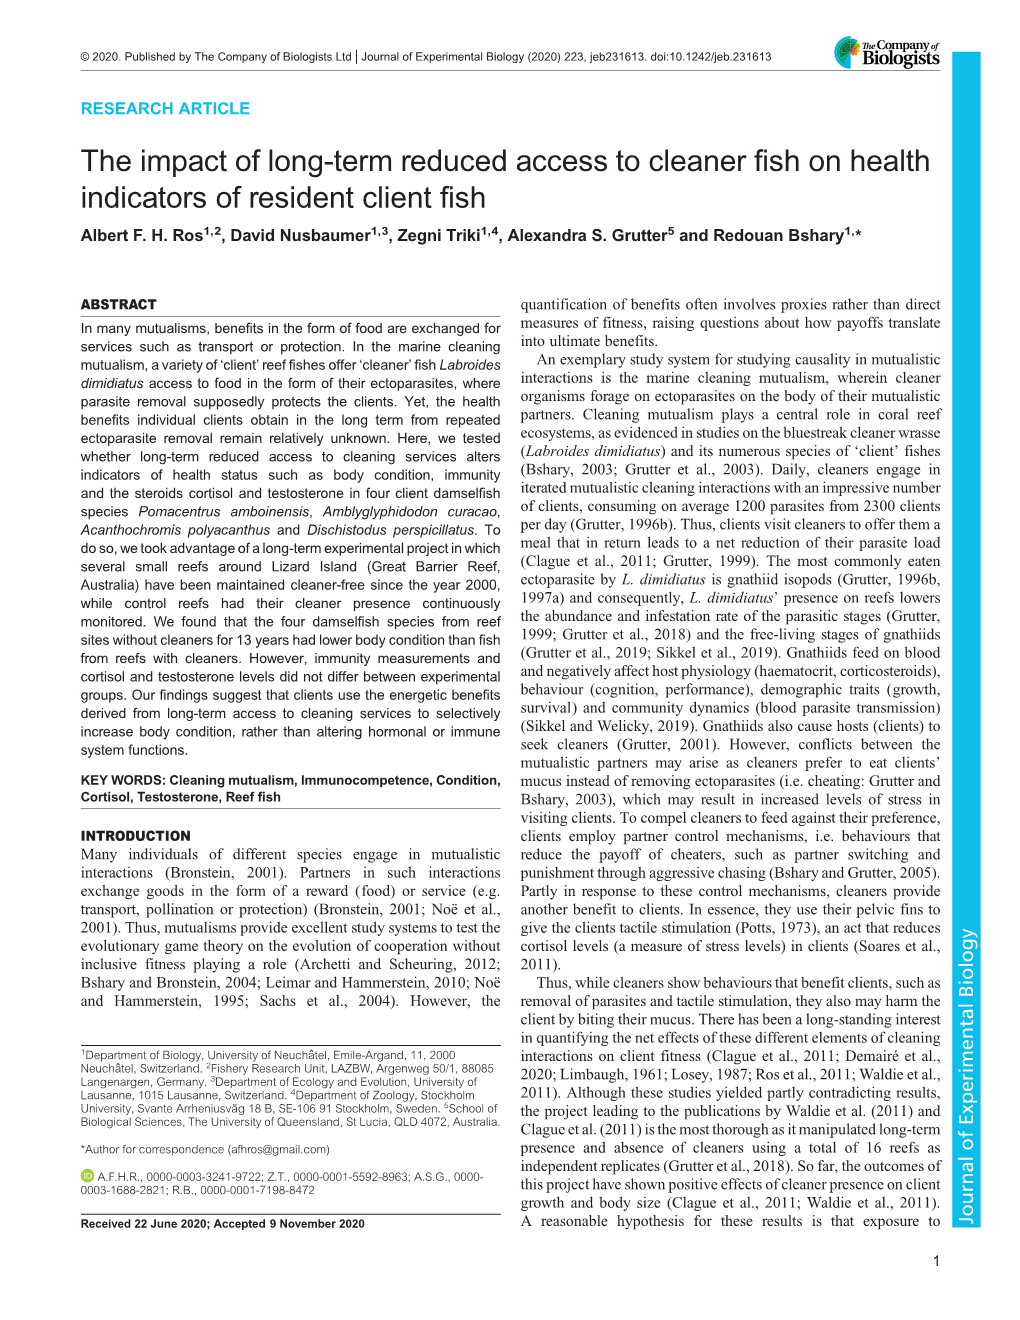 The Impact of Long-Term Reduced Access to Cleaner Fish on Health Indicators of Resident Client Fish Albert F